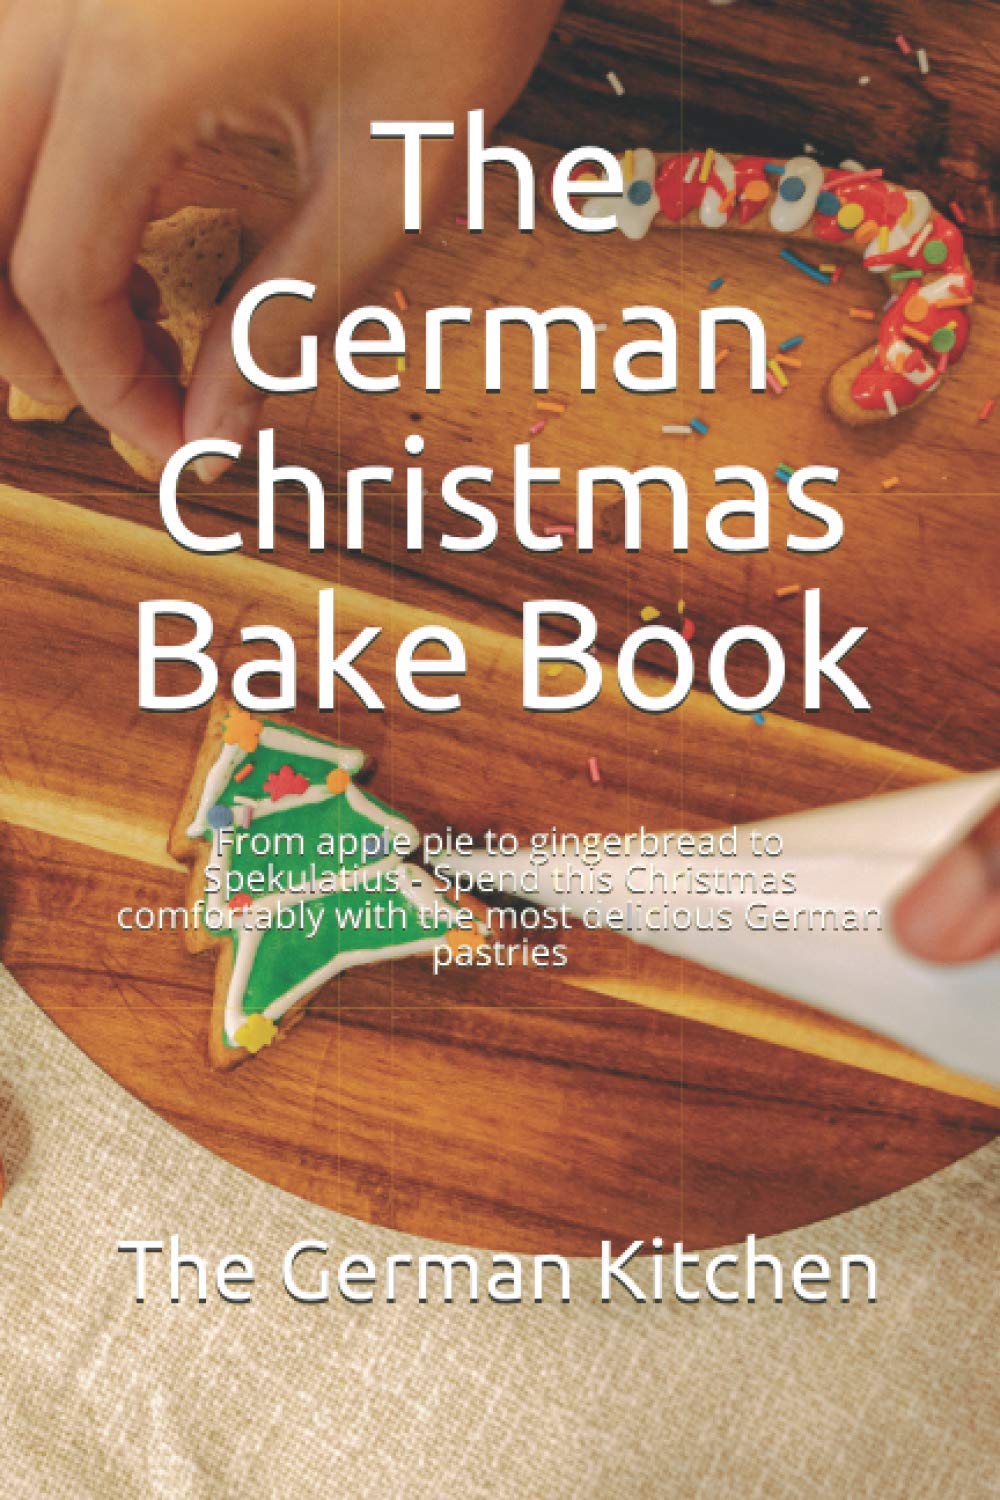 The German Christmas Bake Book: From apple pie to gingerbread to Spekulatius - Spend this Christmas comfortably with the most delicious German pastrie